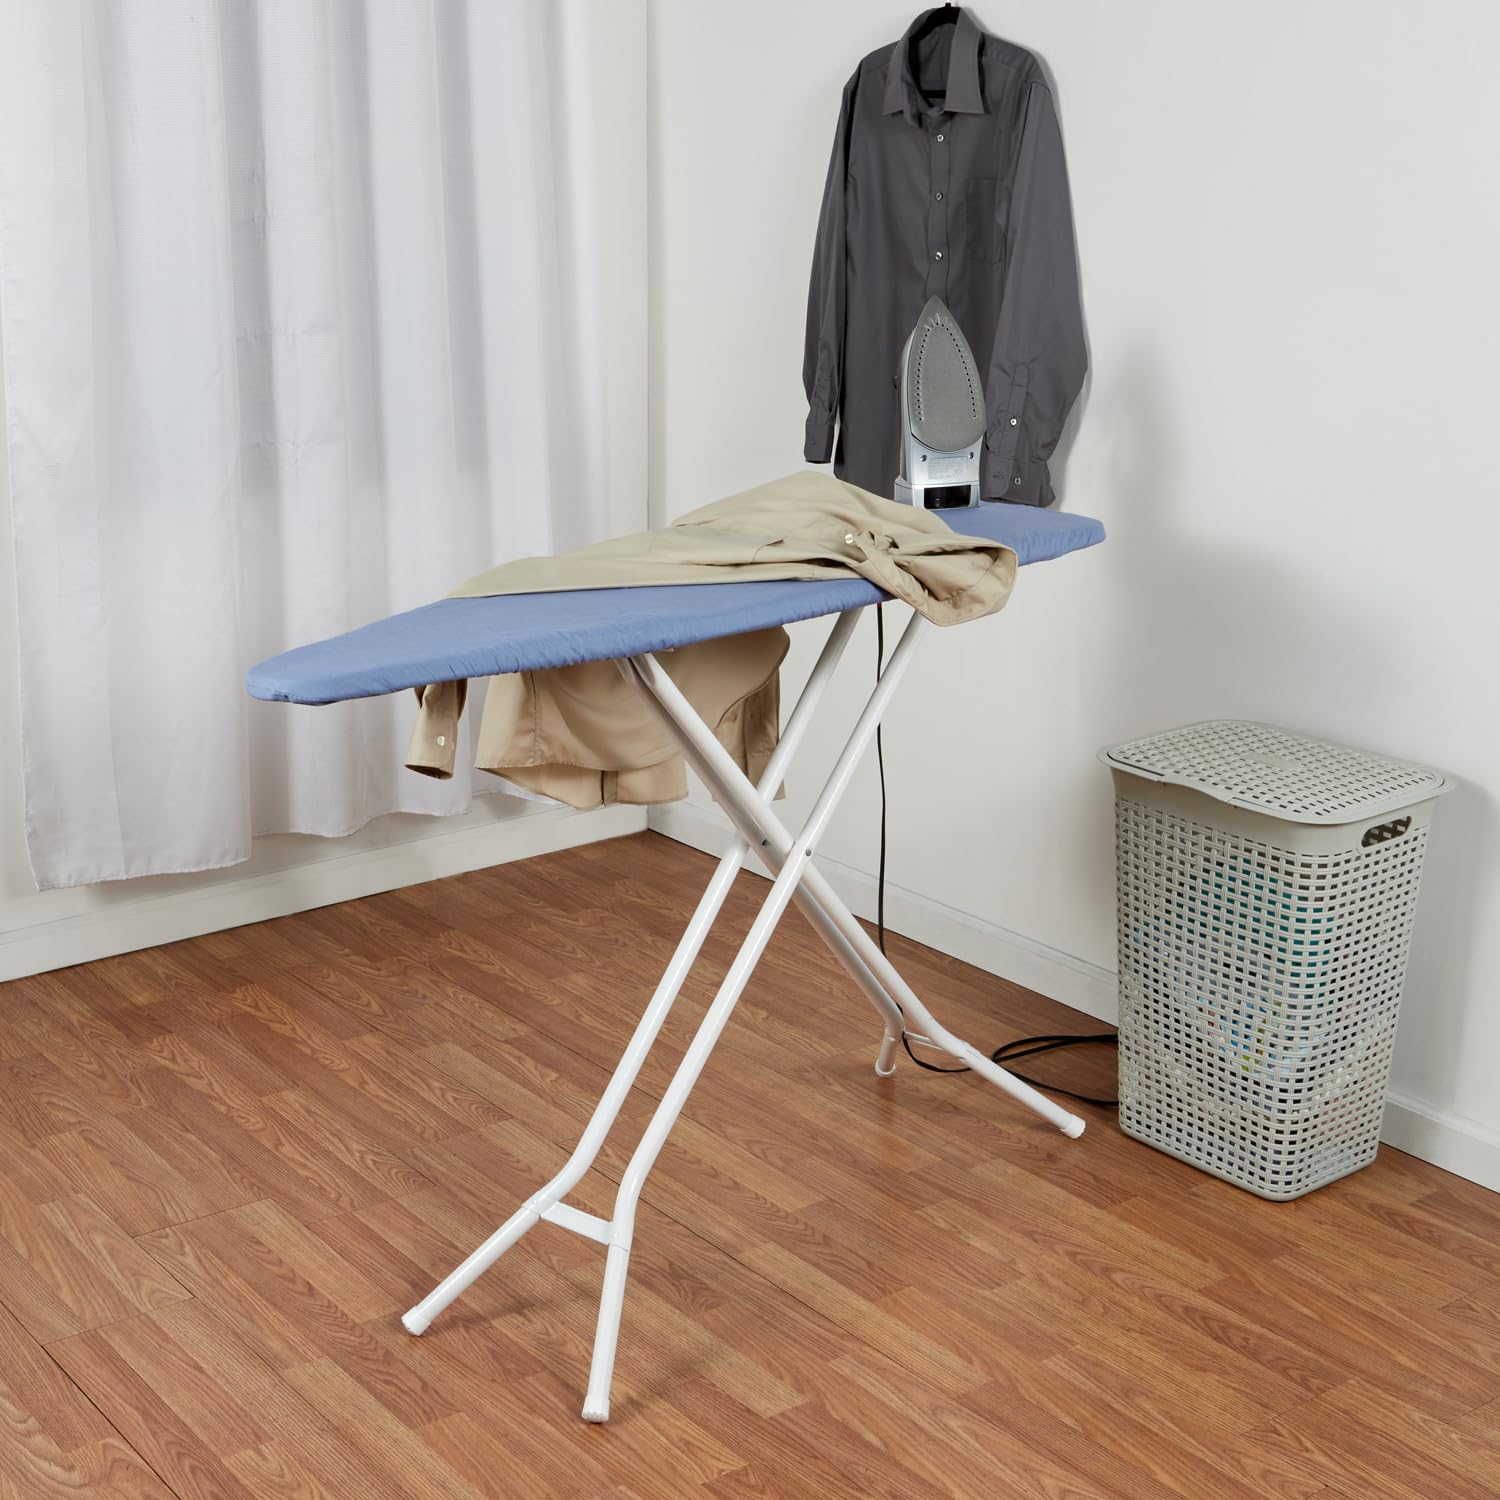 Ironing Board Cover and Pad (Forever Blue), 100% Cotton with Premium Polyester Padding by Seymour Home Products;  Fits Full Size Board | Stain and Scorch Resistant; Elastic Edge | Laundry Accessories